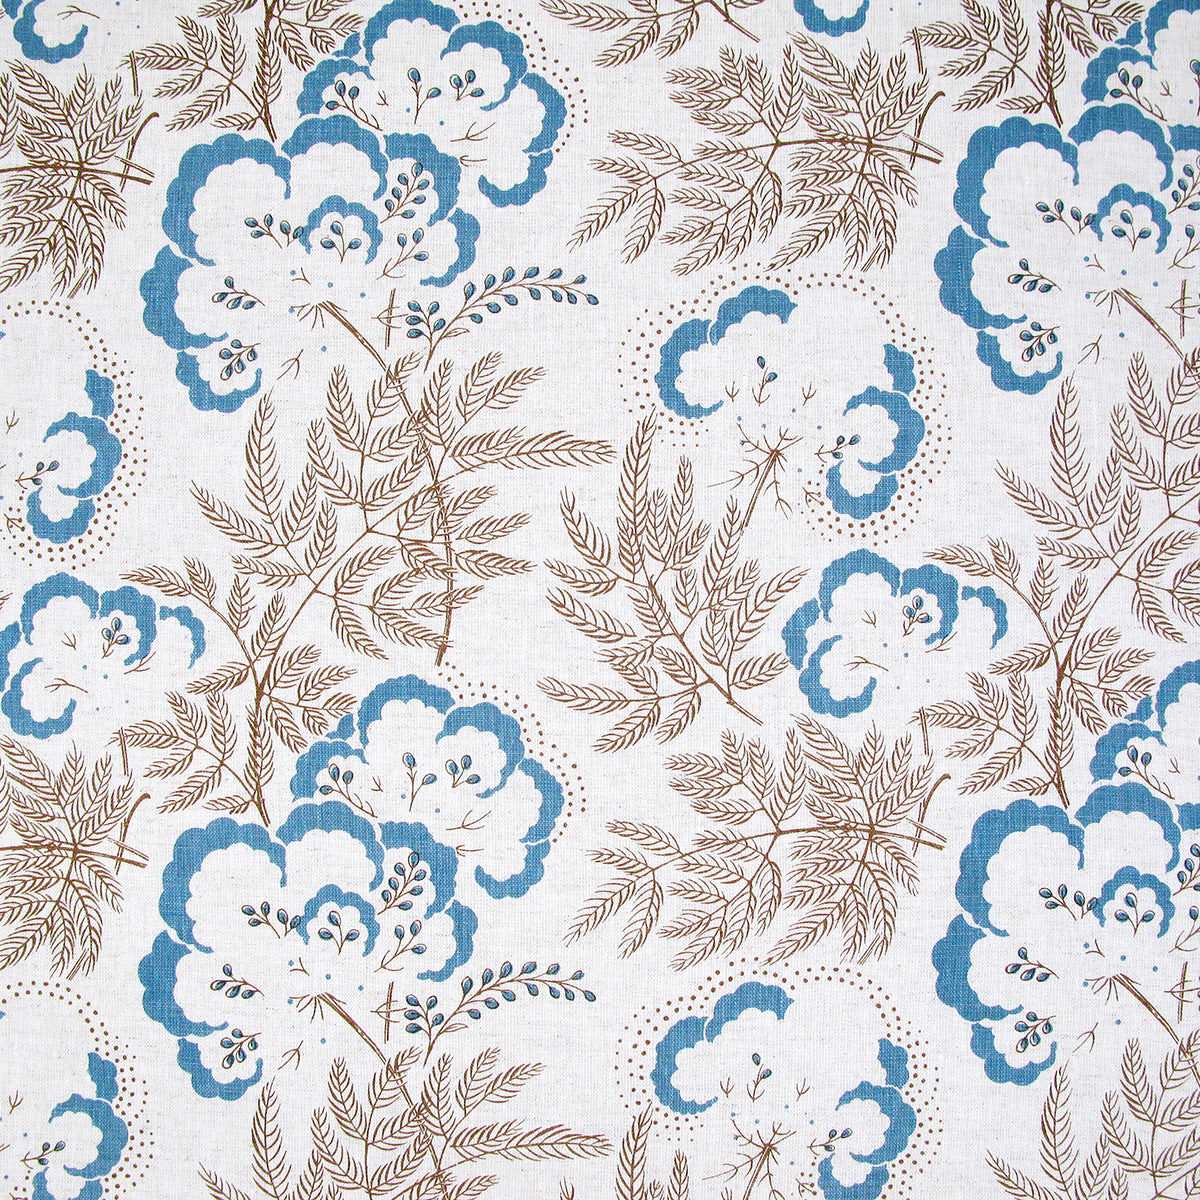 Detail of fabric in an intricate floral print in blue and brown on a white field.